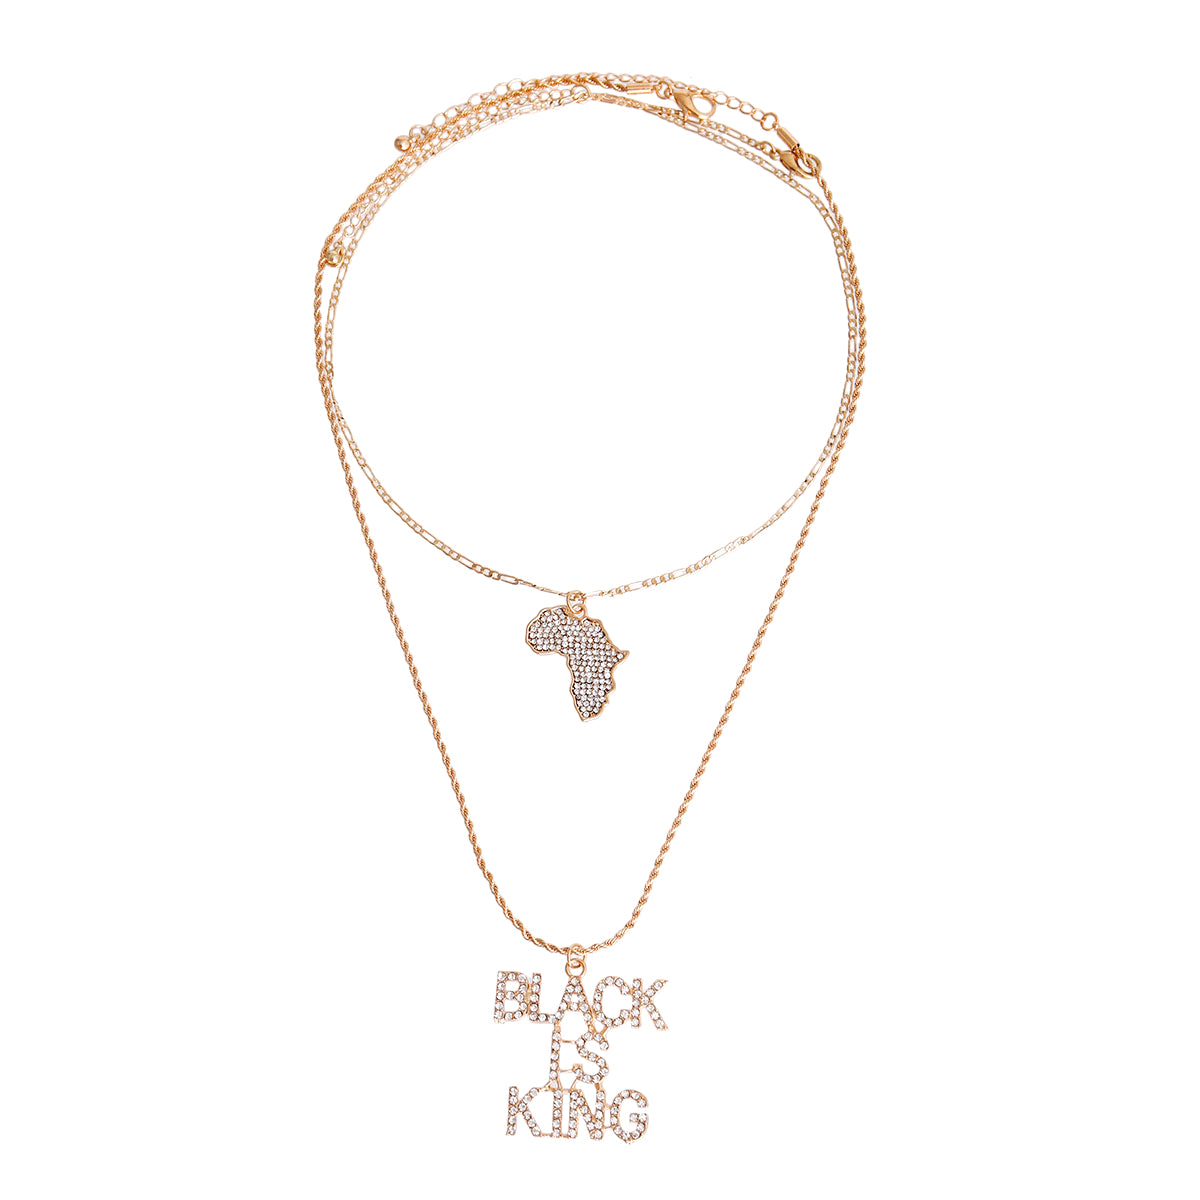 Gold Double Chain Black is King Necklace